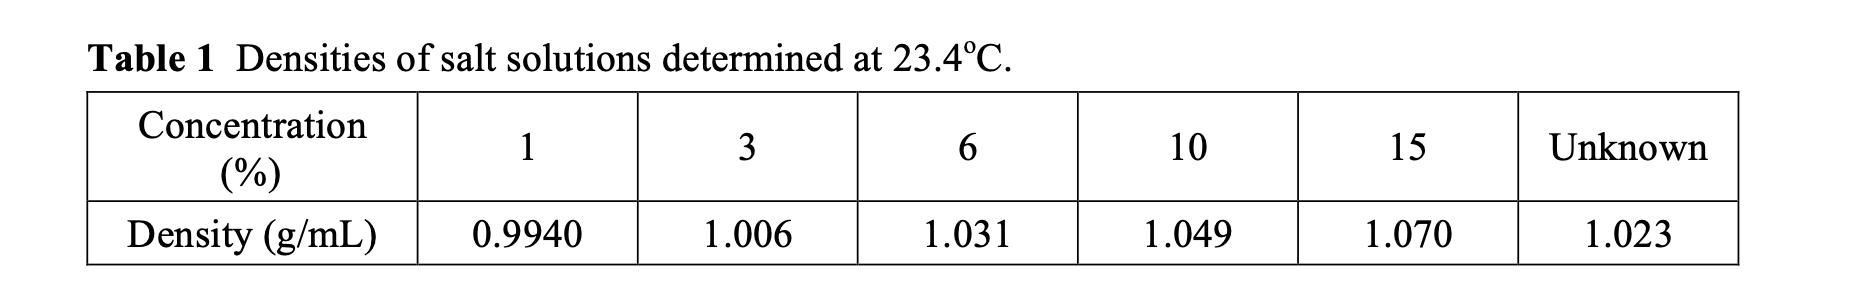 Table 1 Densities of salt solutions determined at 23.4°C.
Concentration
1
3
10
15
Unknown
(%)
Density (g/mL)
0.9940
1.006
1.031
1.049
1.070
1.023
